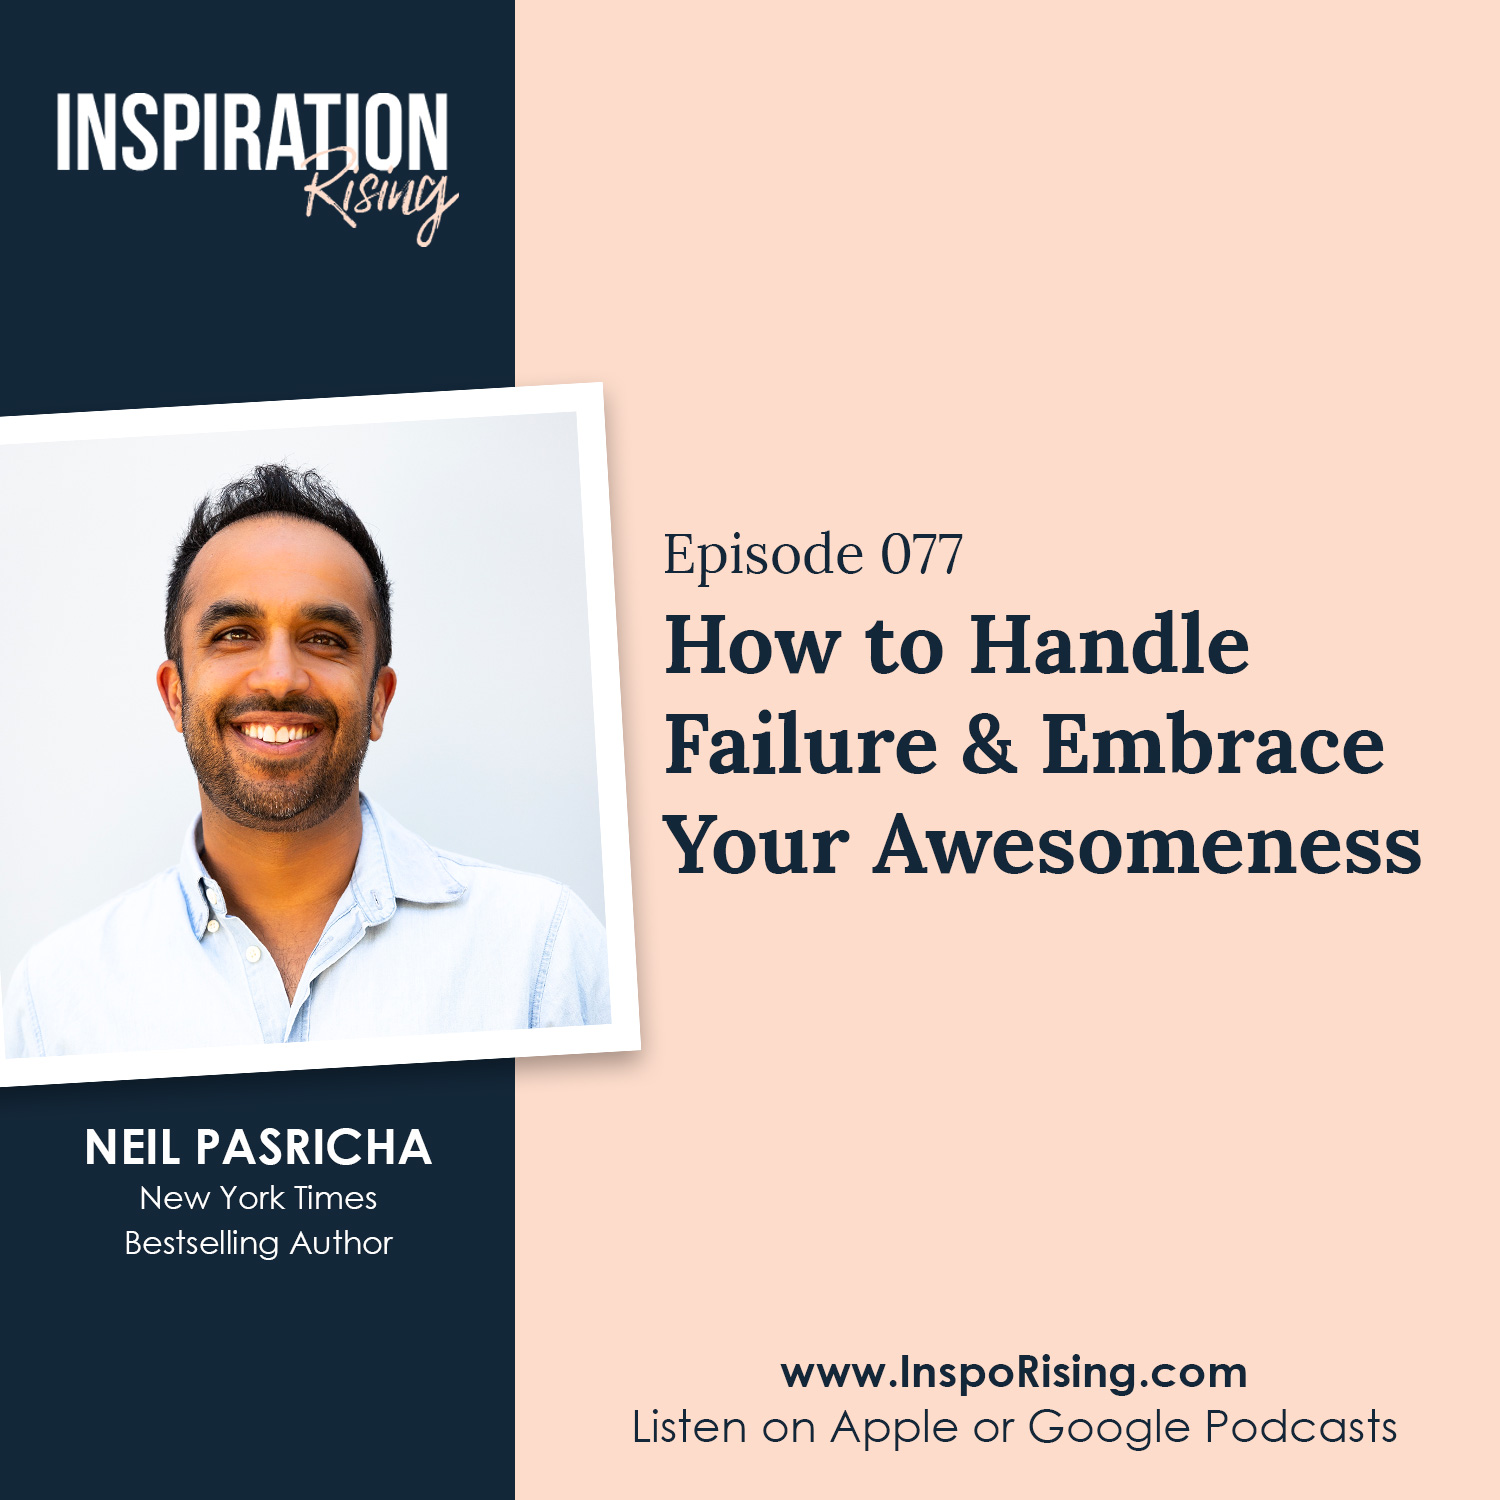 Neil Pasricha - You Are Awesome